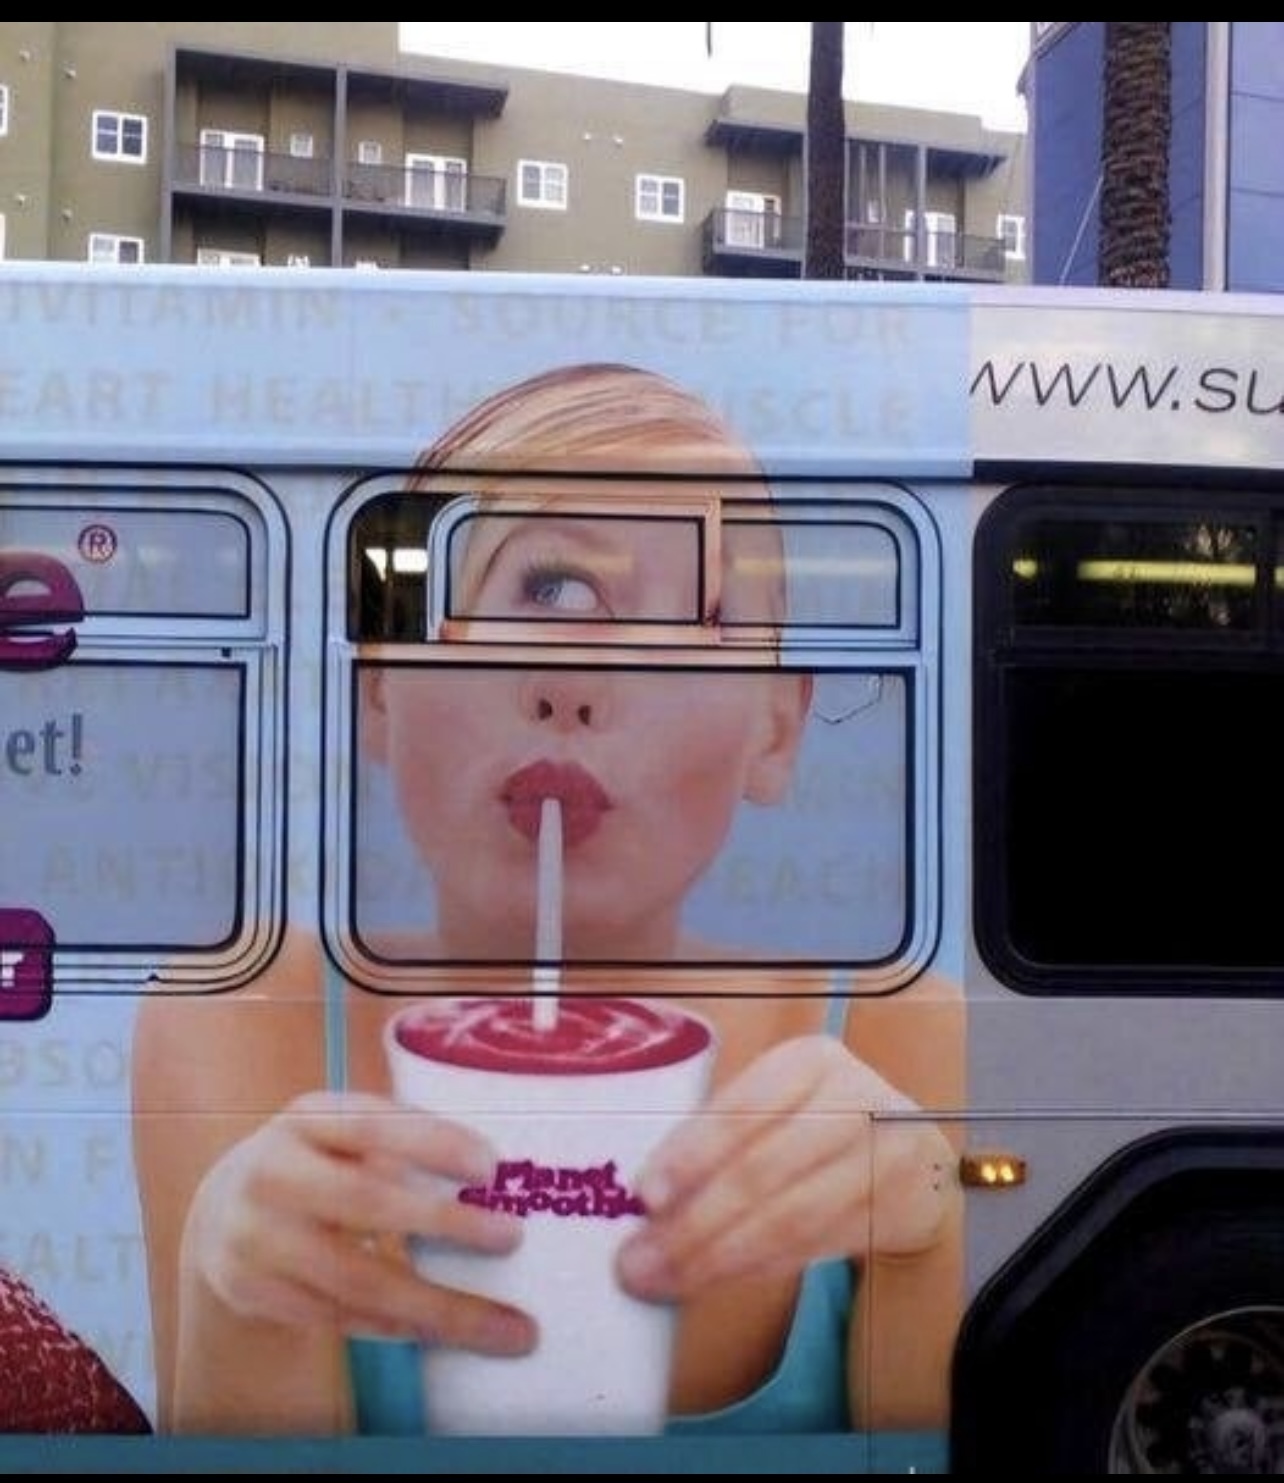 An incident at a bus stop - Cyclops, Humor, Hardened, Advertising, Bus, Girls, Images, Memes